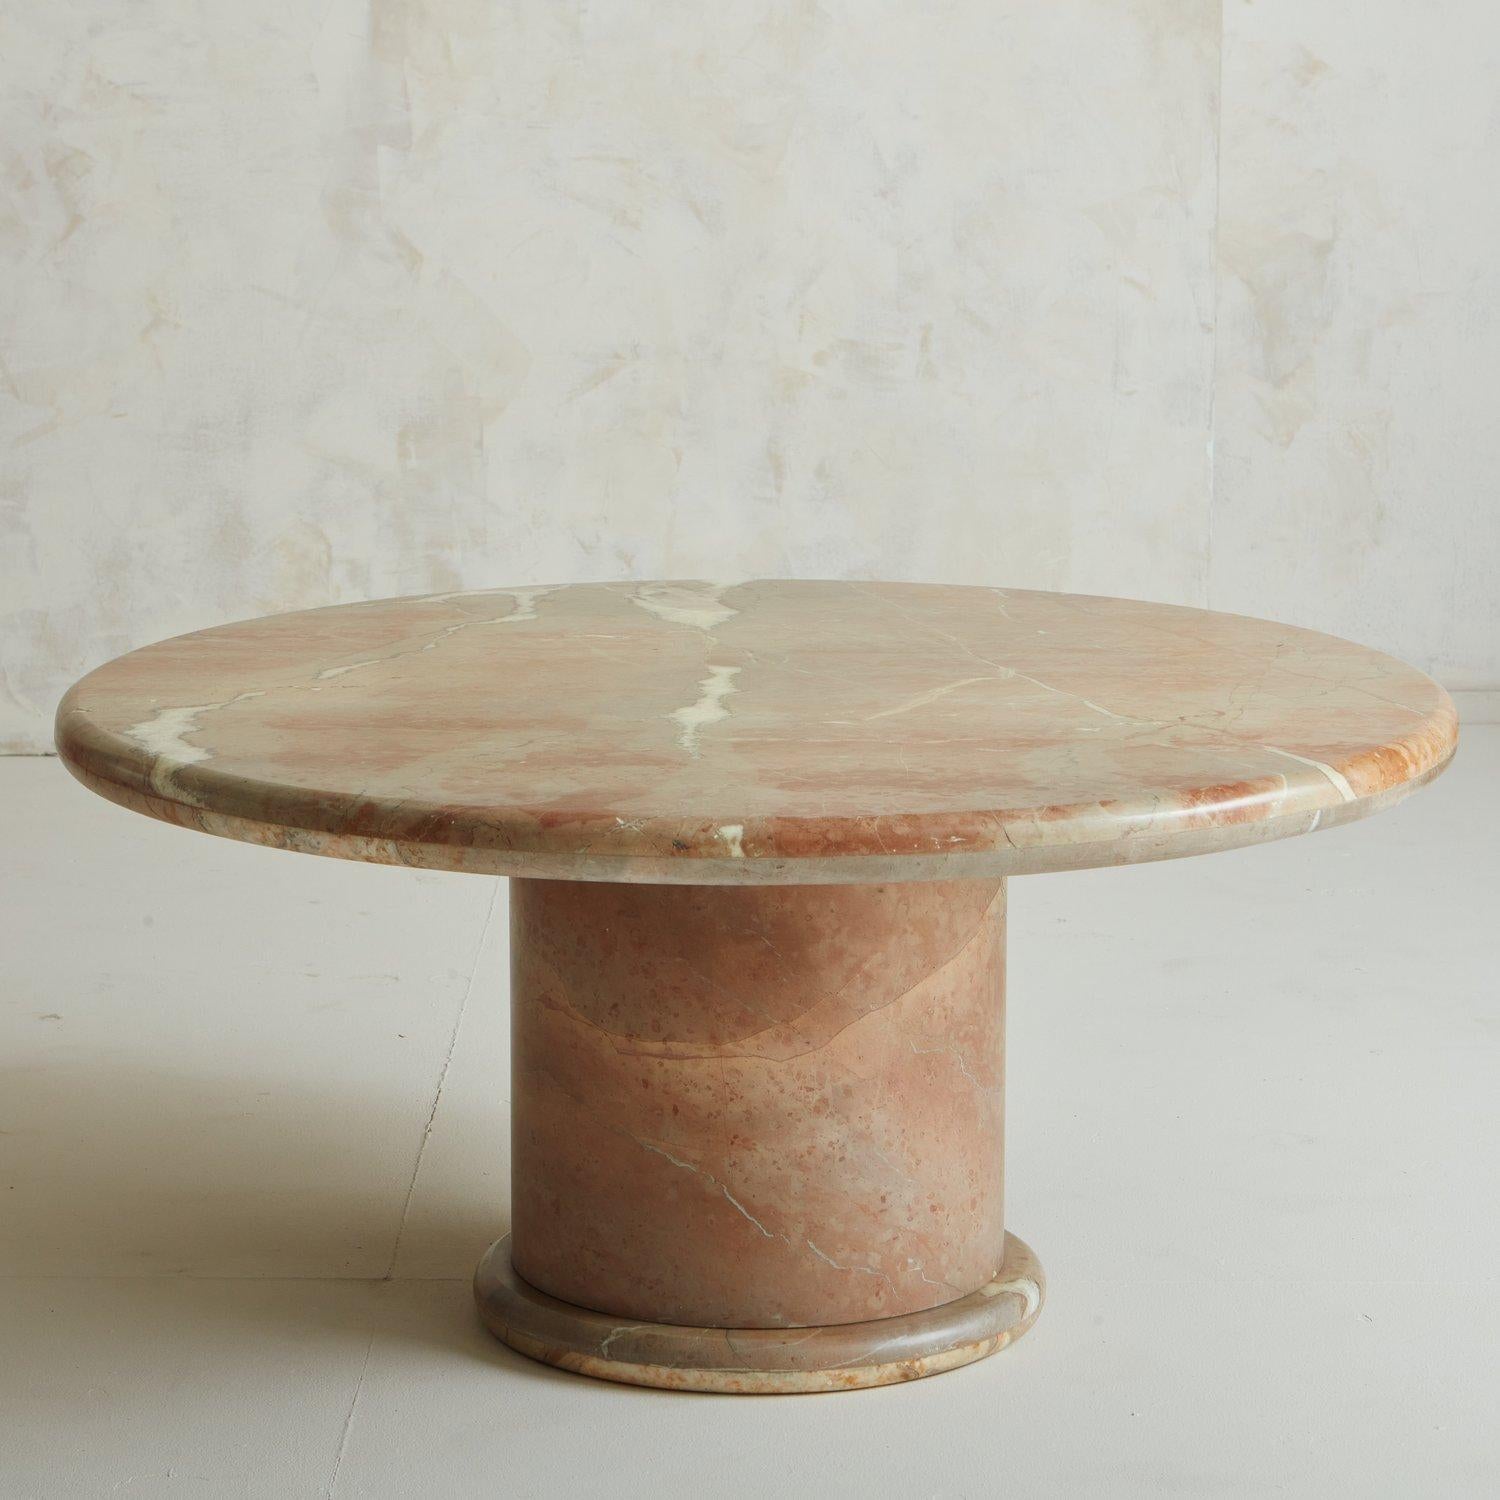 A polished Rojo Alicante marble coffee table featuring a round 2” thick tabletop on a circular base with a banded-edge detail. The tabletop has a wood stone tap on the underside, allowing it to sit securely in the base. This marble is a stunning